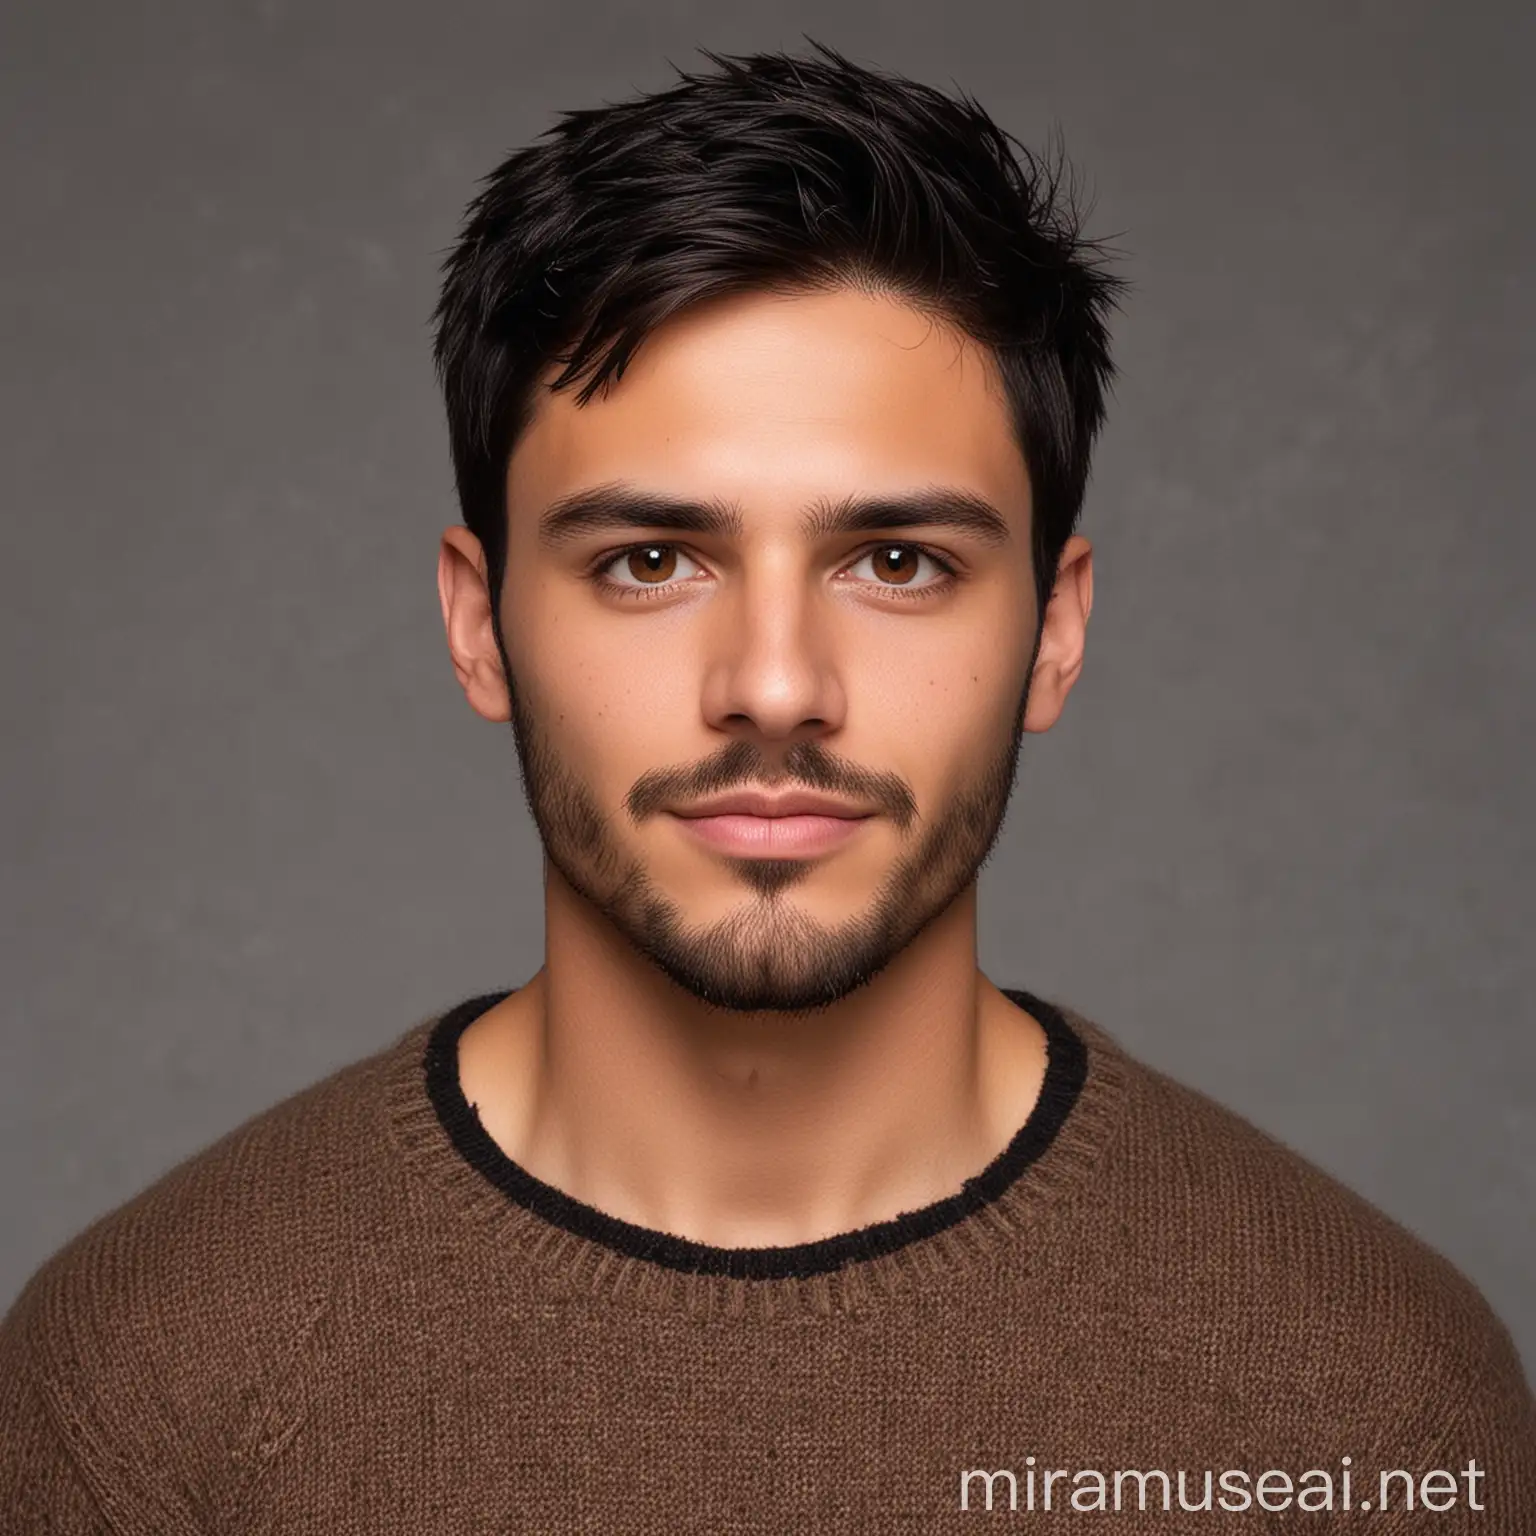 Portrait of a 32YearOld Man with Short Dark Hair and Brown Eyes in a Black Sweater